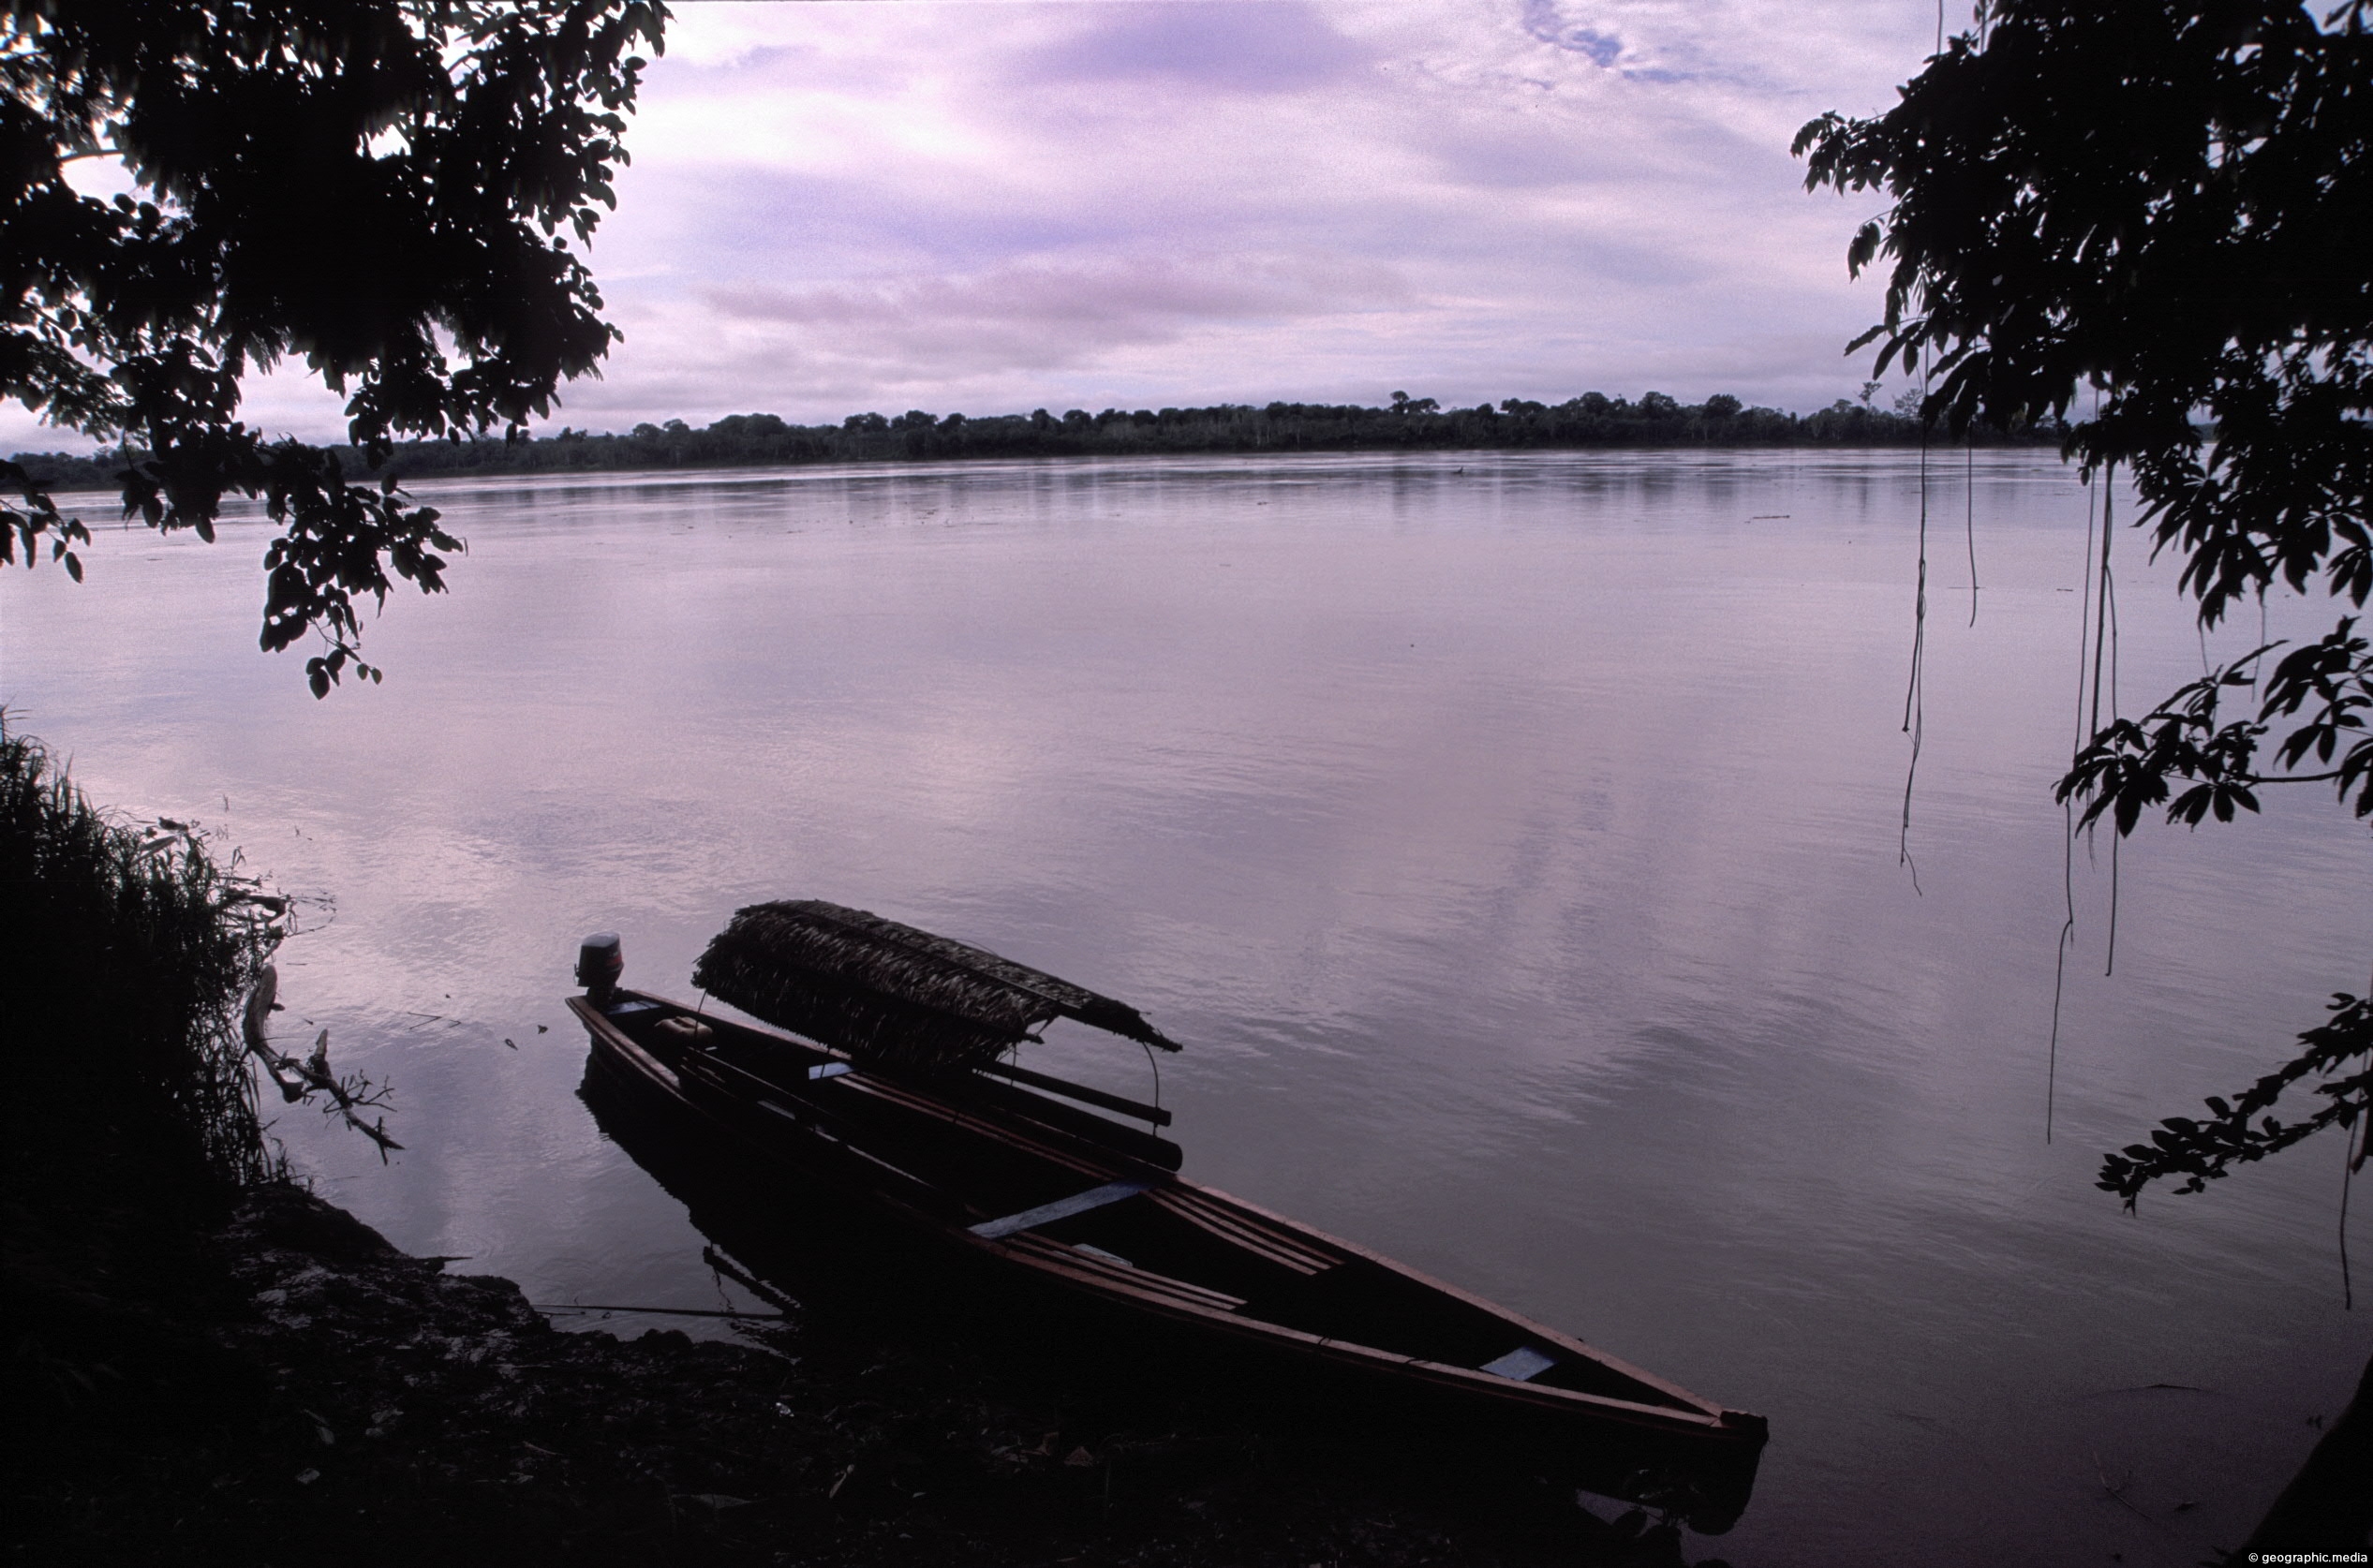 View of the Amazon River in Colombia